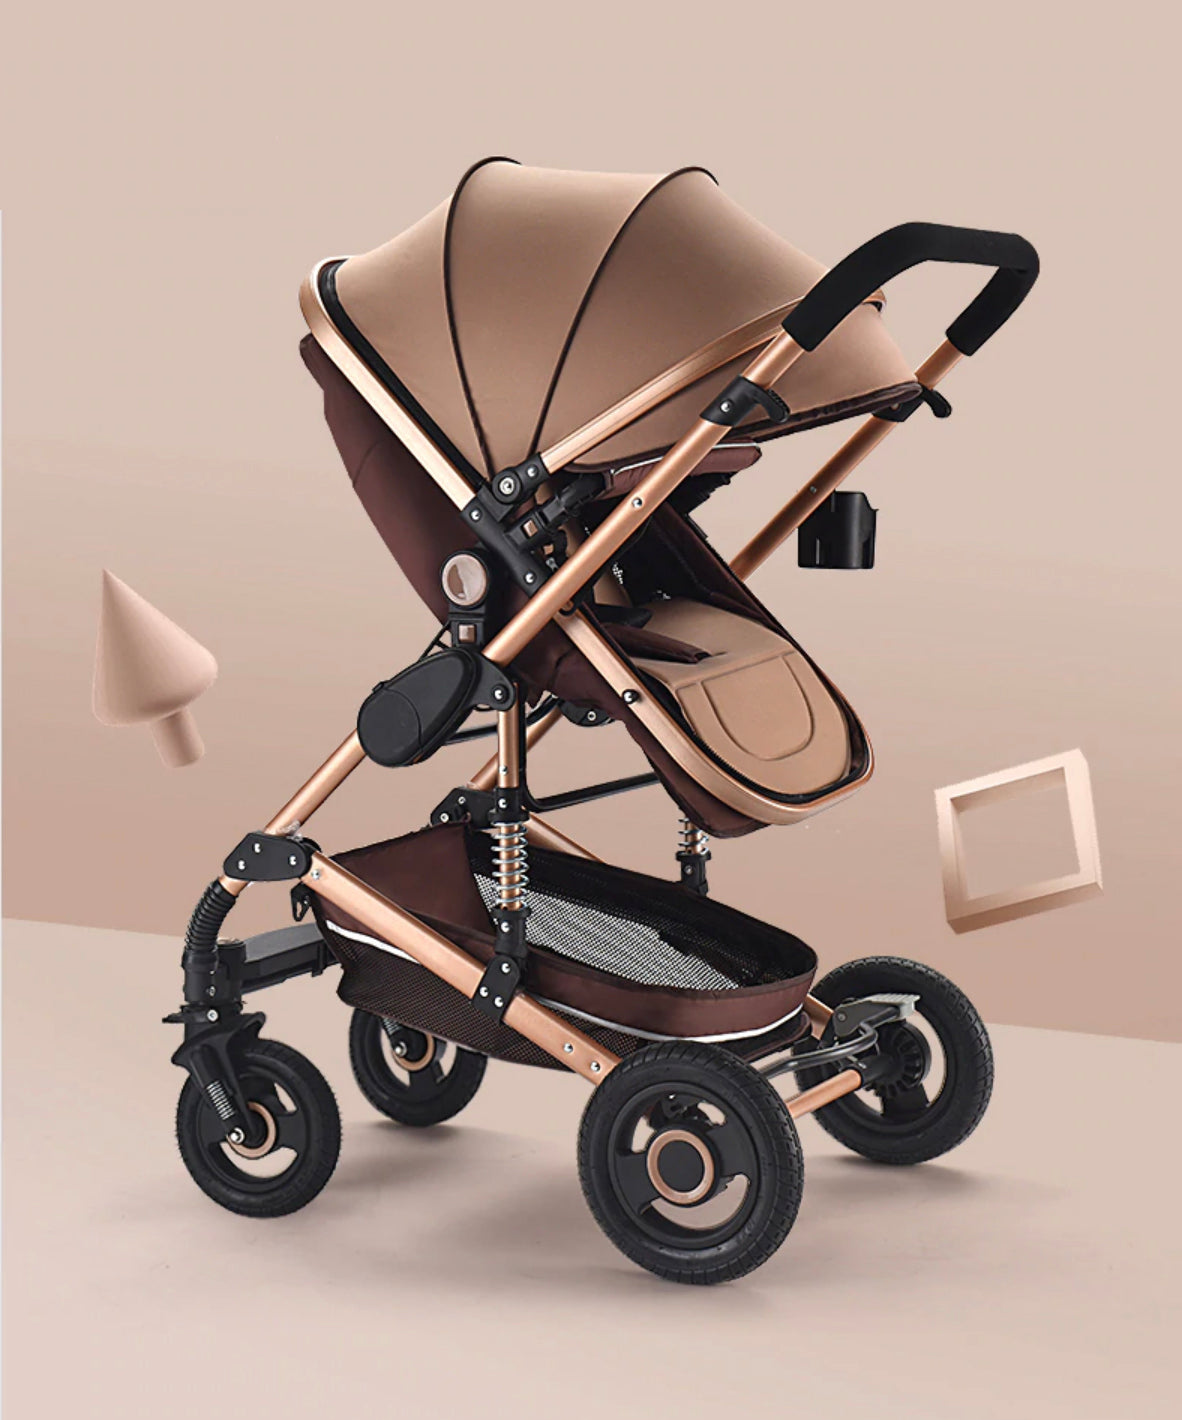 cargo stroller and carseat